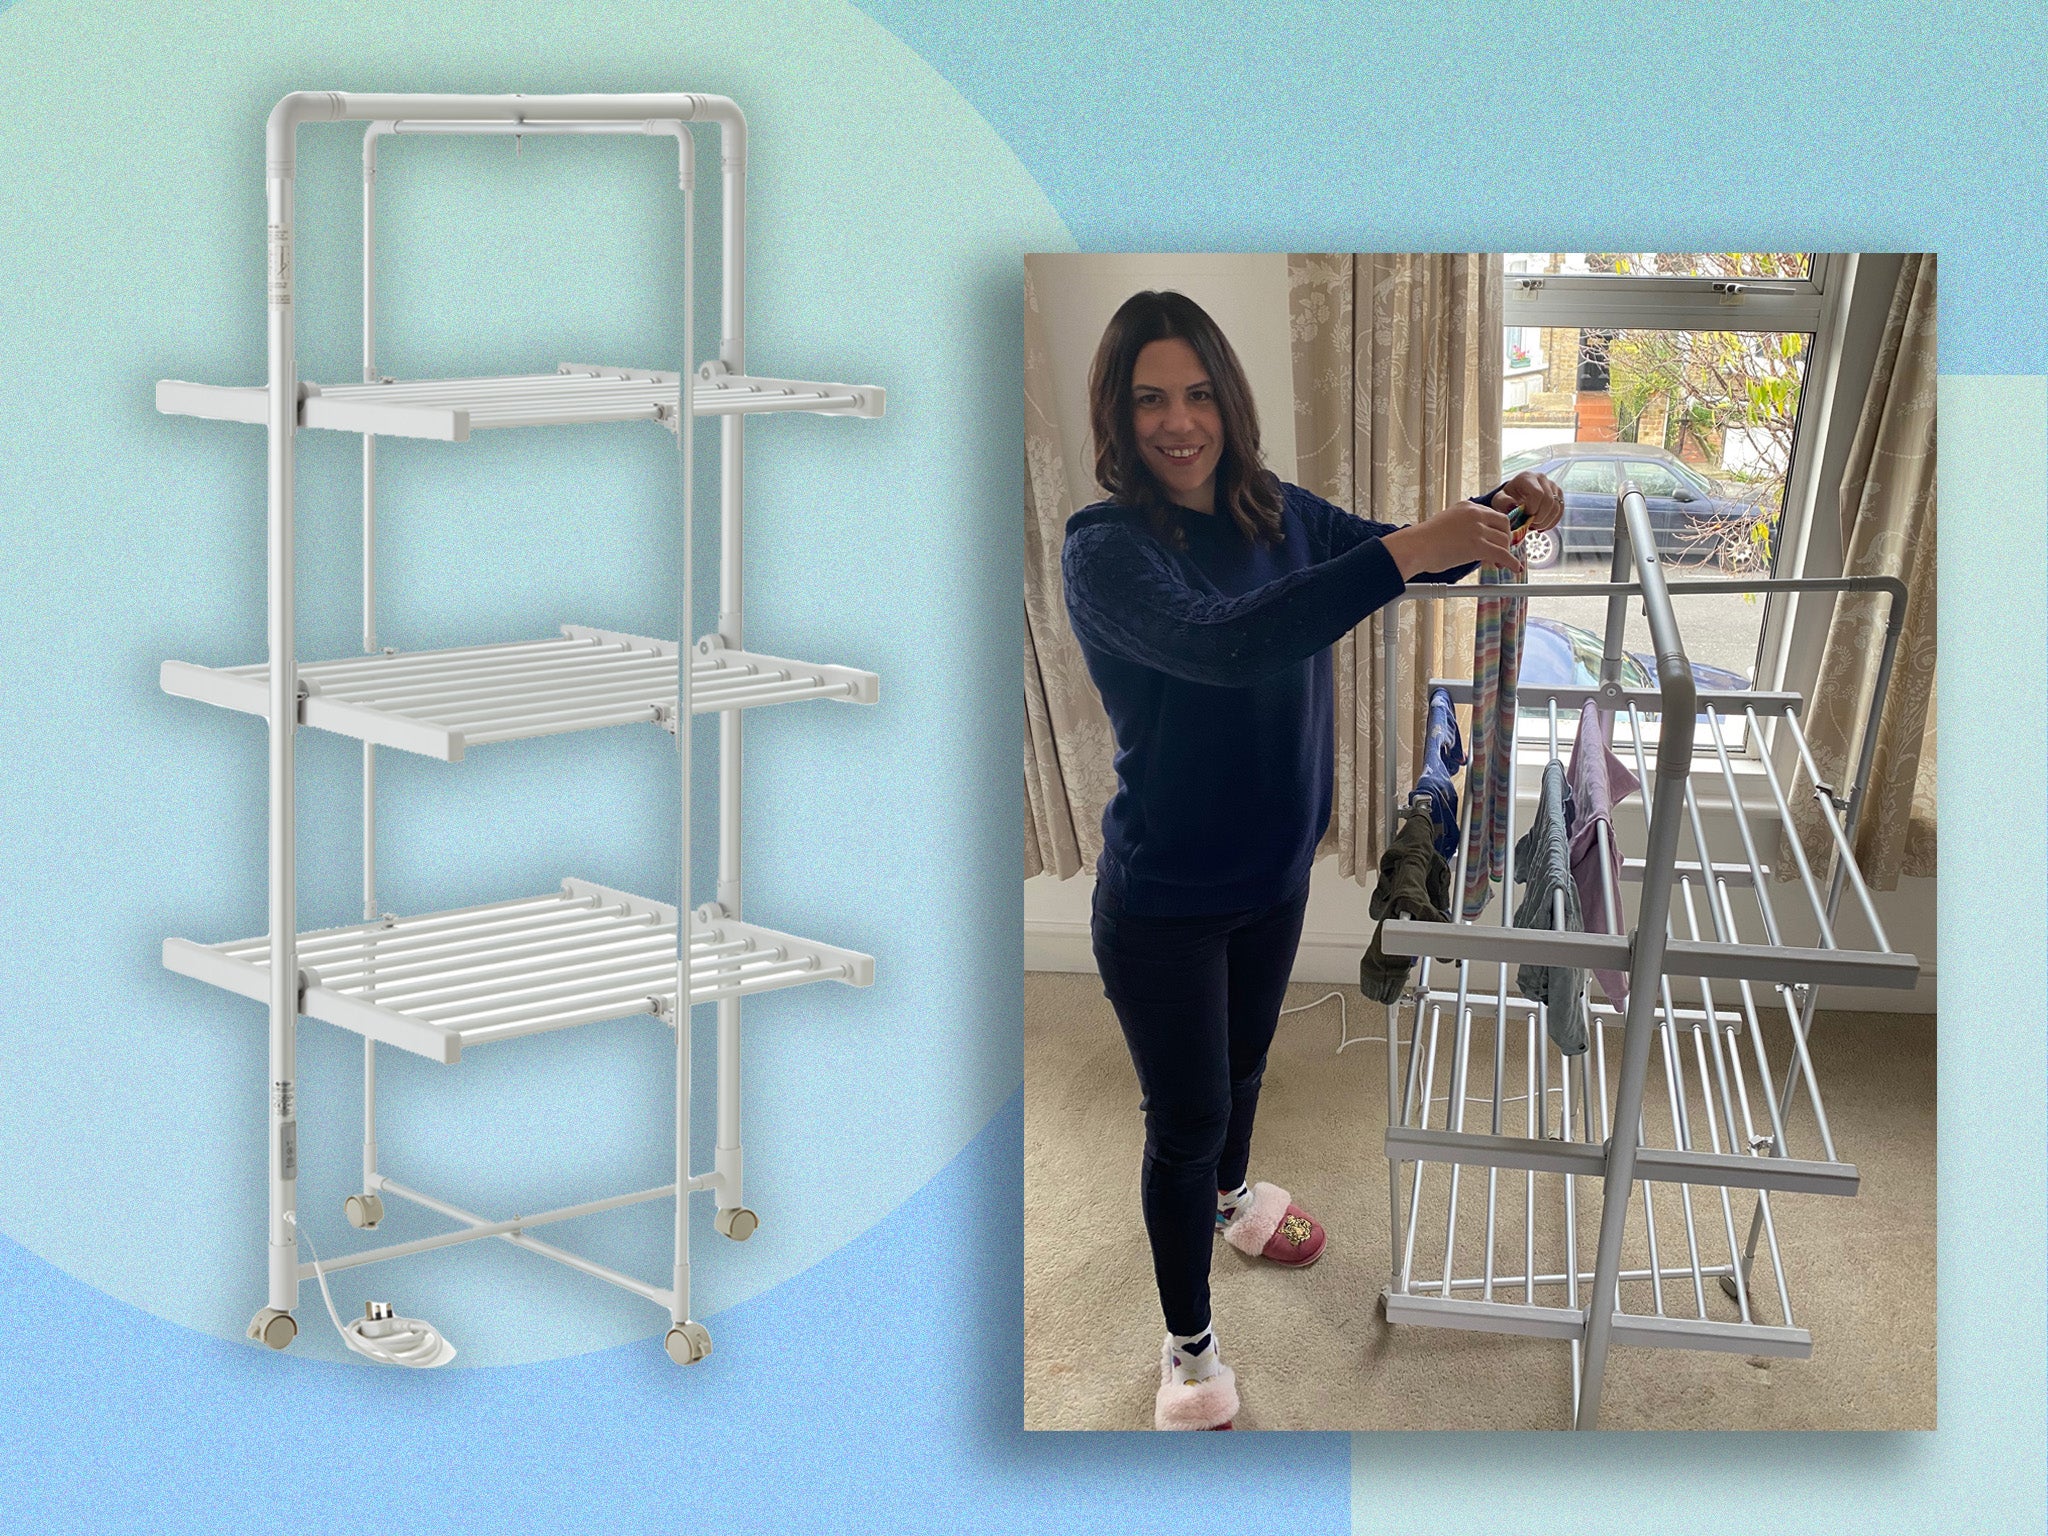 The clothes airer boasts an impressive 21m of heated drying space across three tiers of rails